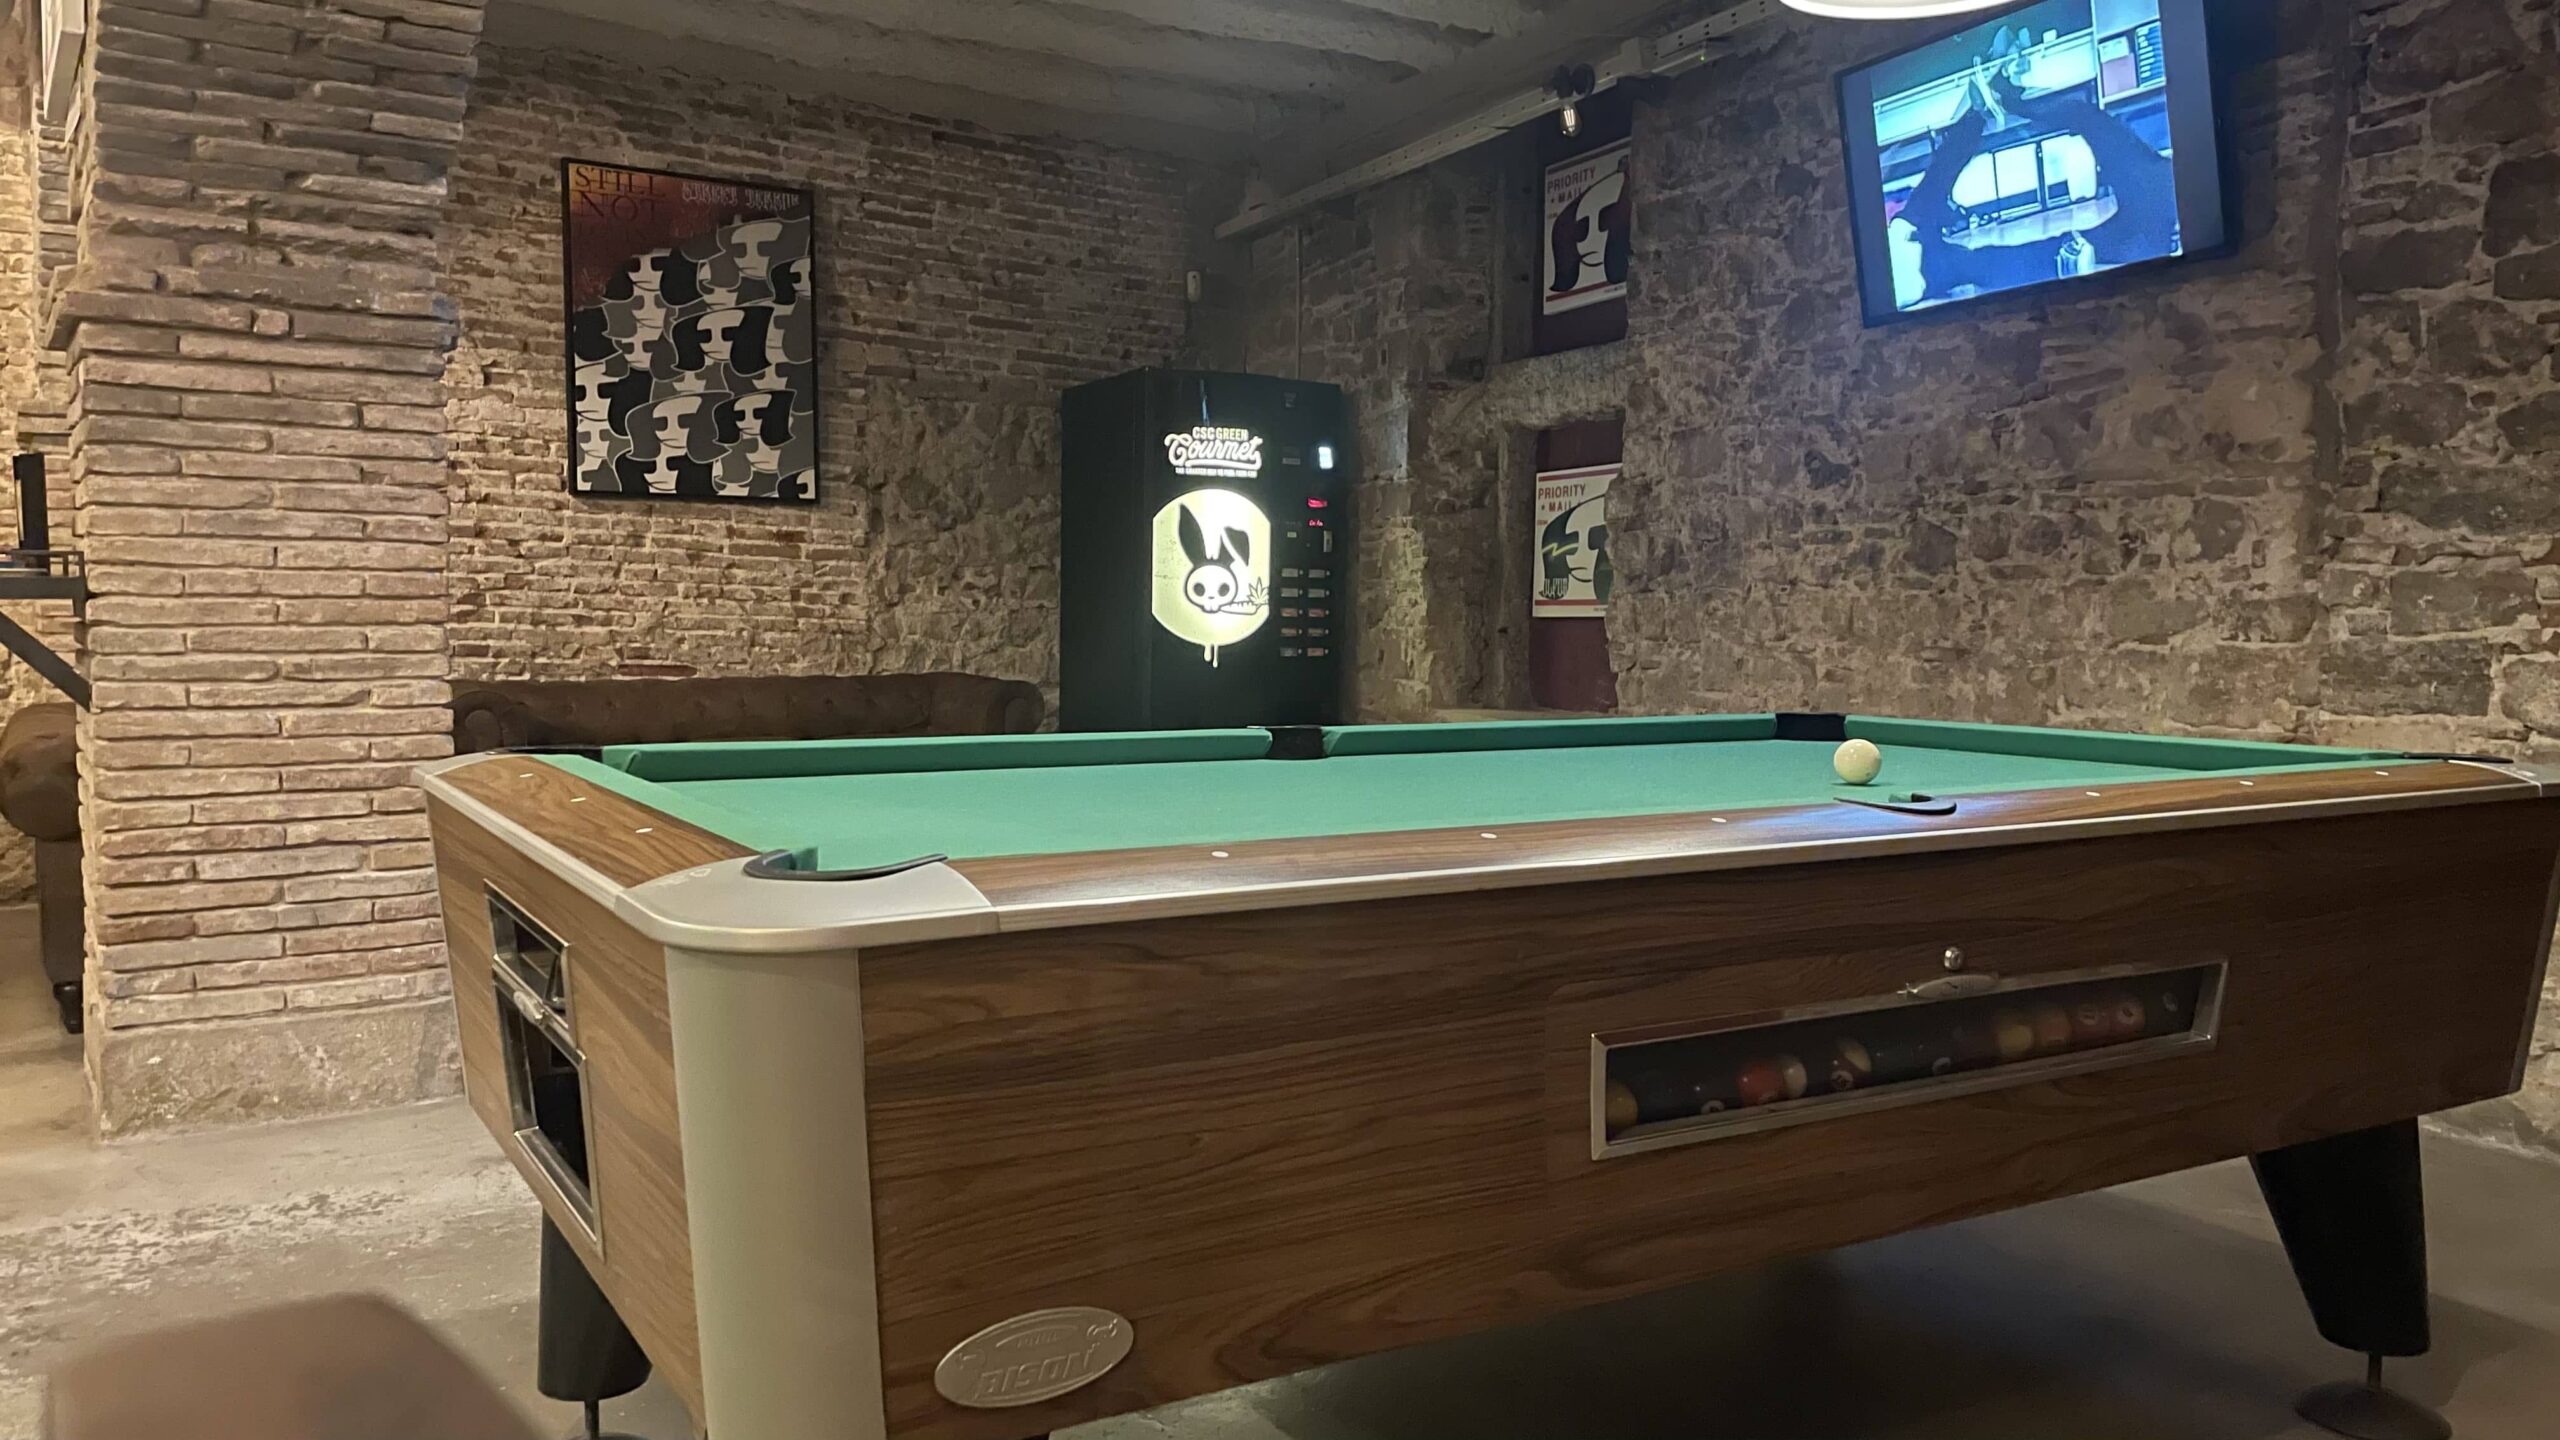 Blunted Social Club in Barcelona decored with paintings and showing pool table